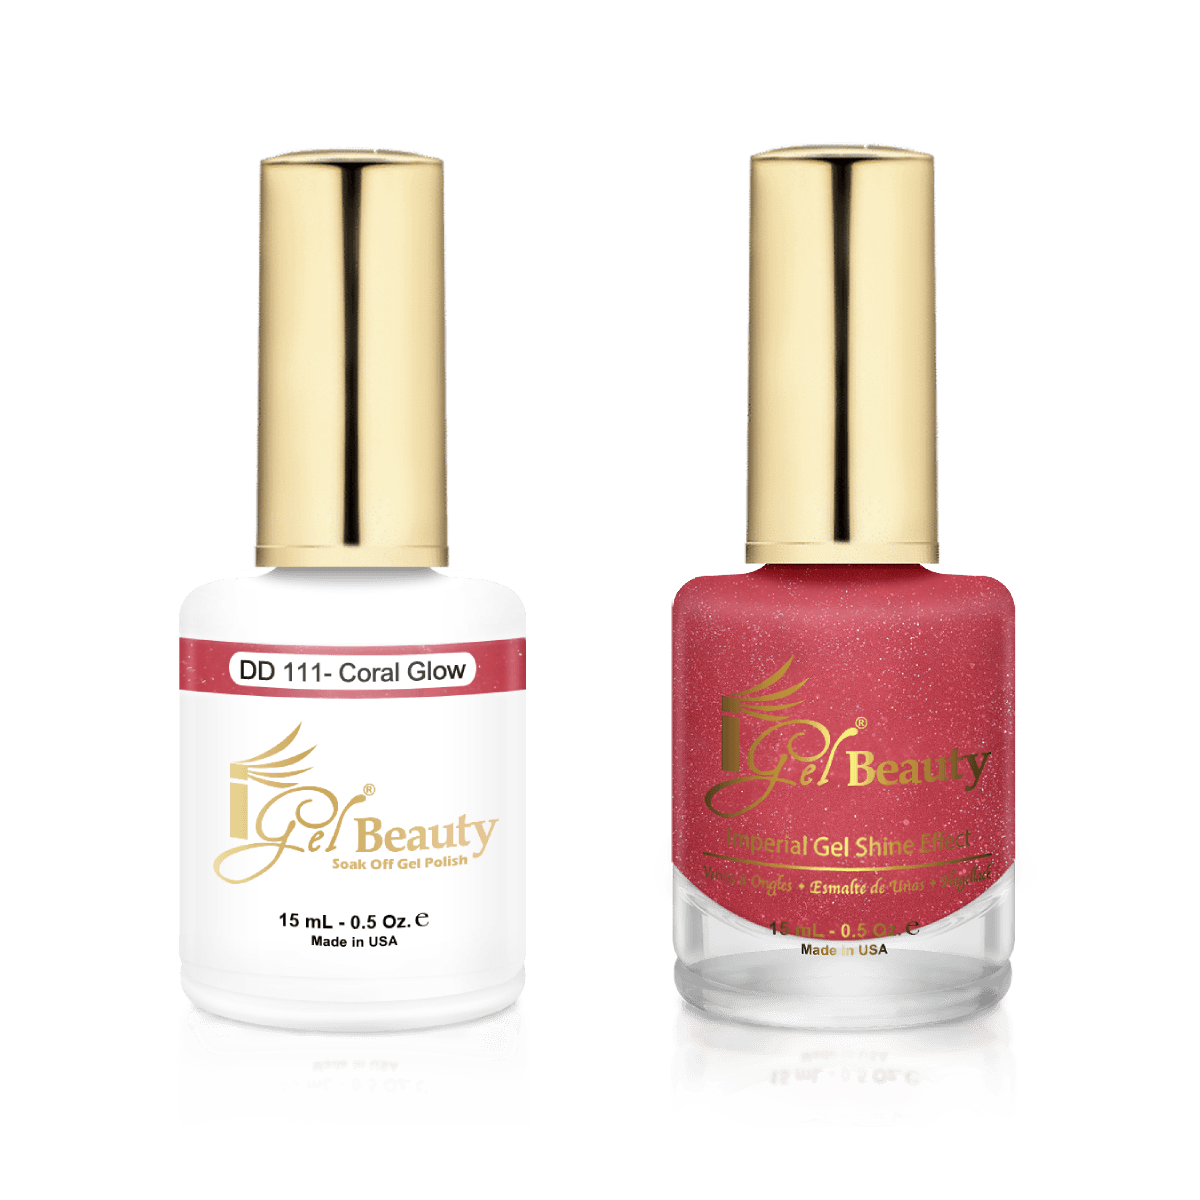 IGel Duo Gel Polish + Matching Nail Lacquer DD 111 CORAL GLOW